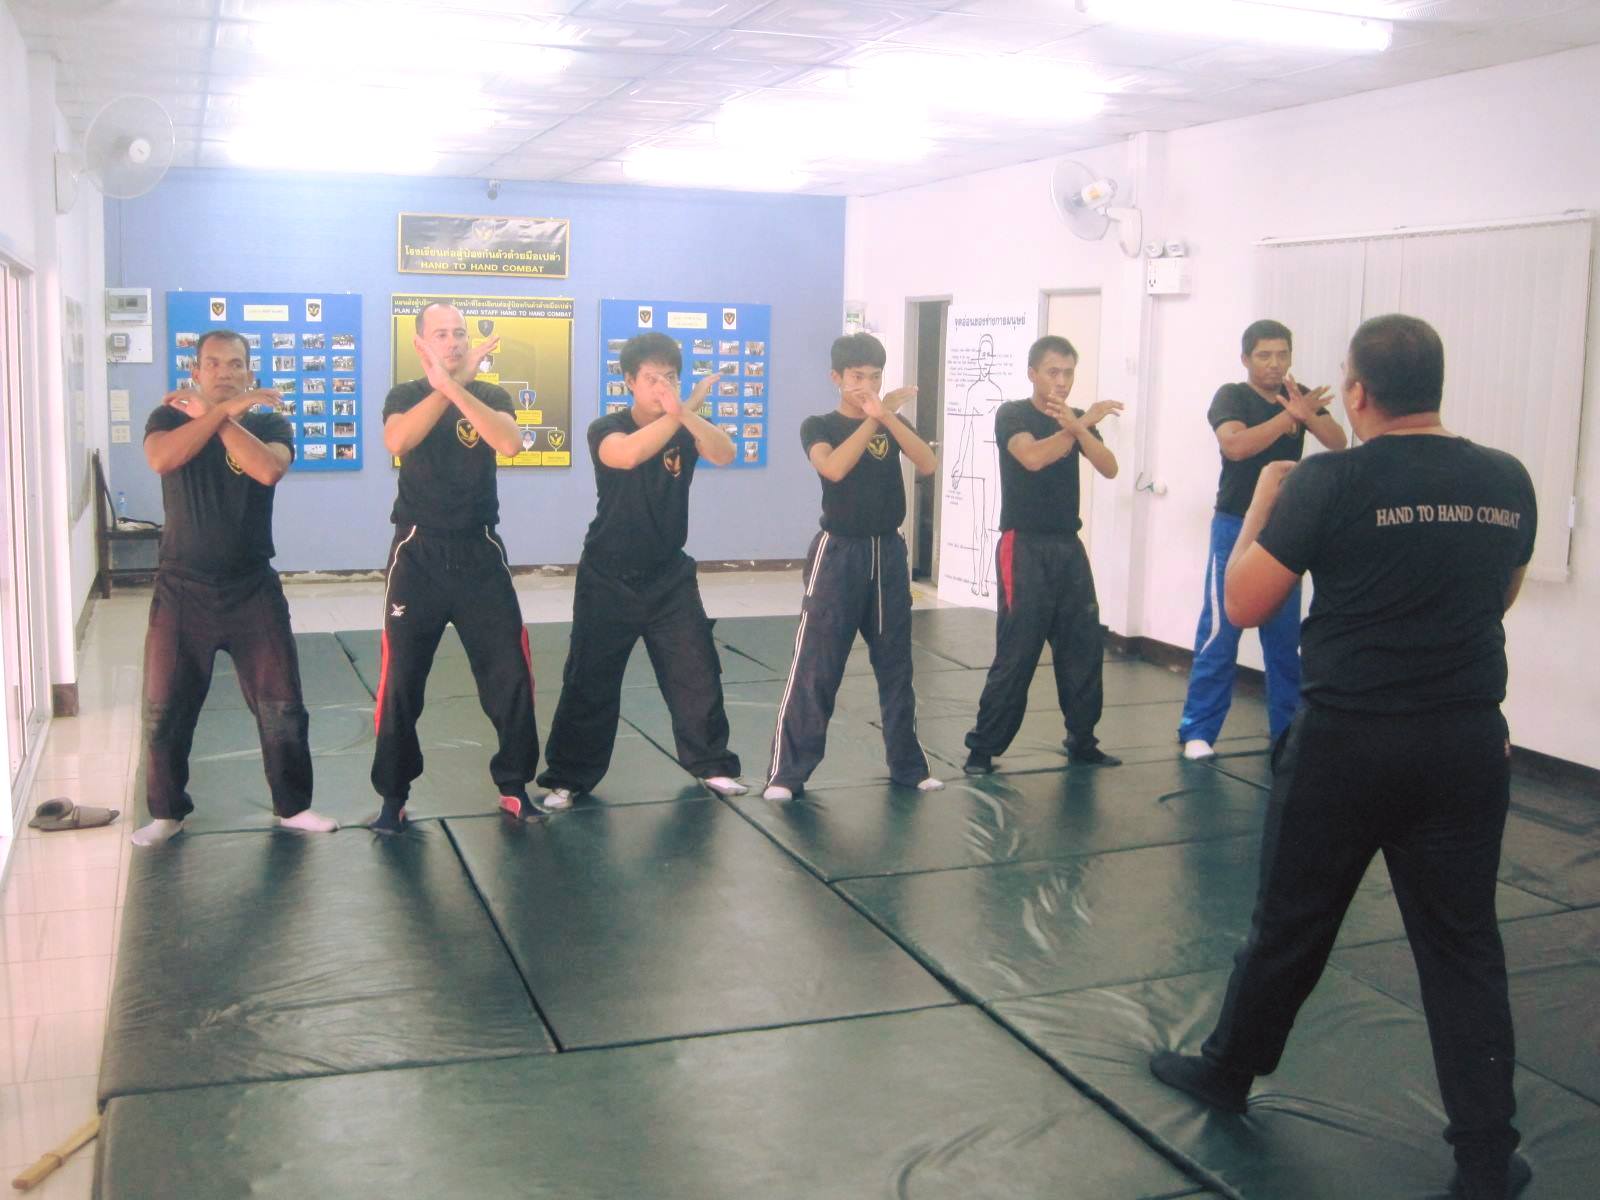 Train to learn how to defend yourself during one year in Thailand and get a 1-year Education Visa